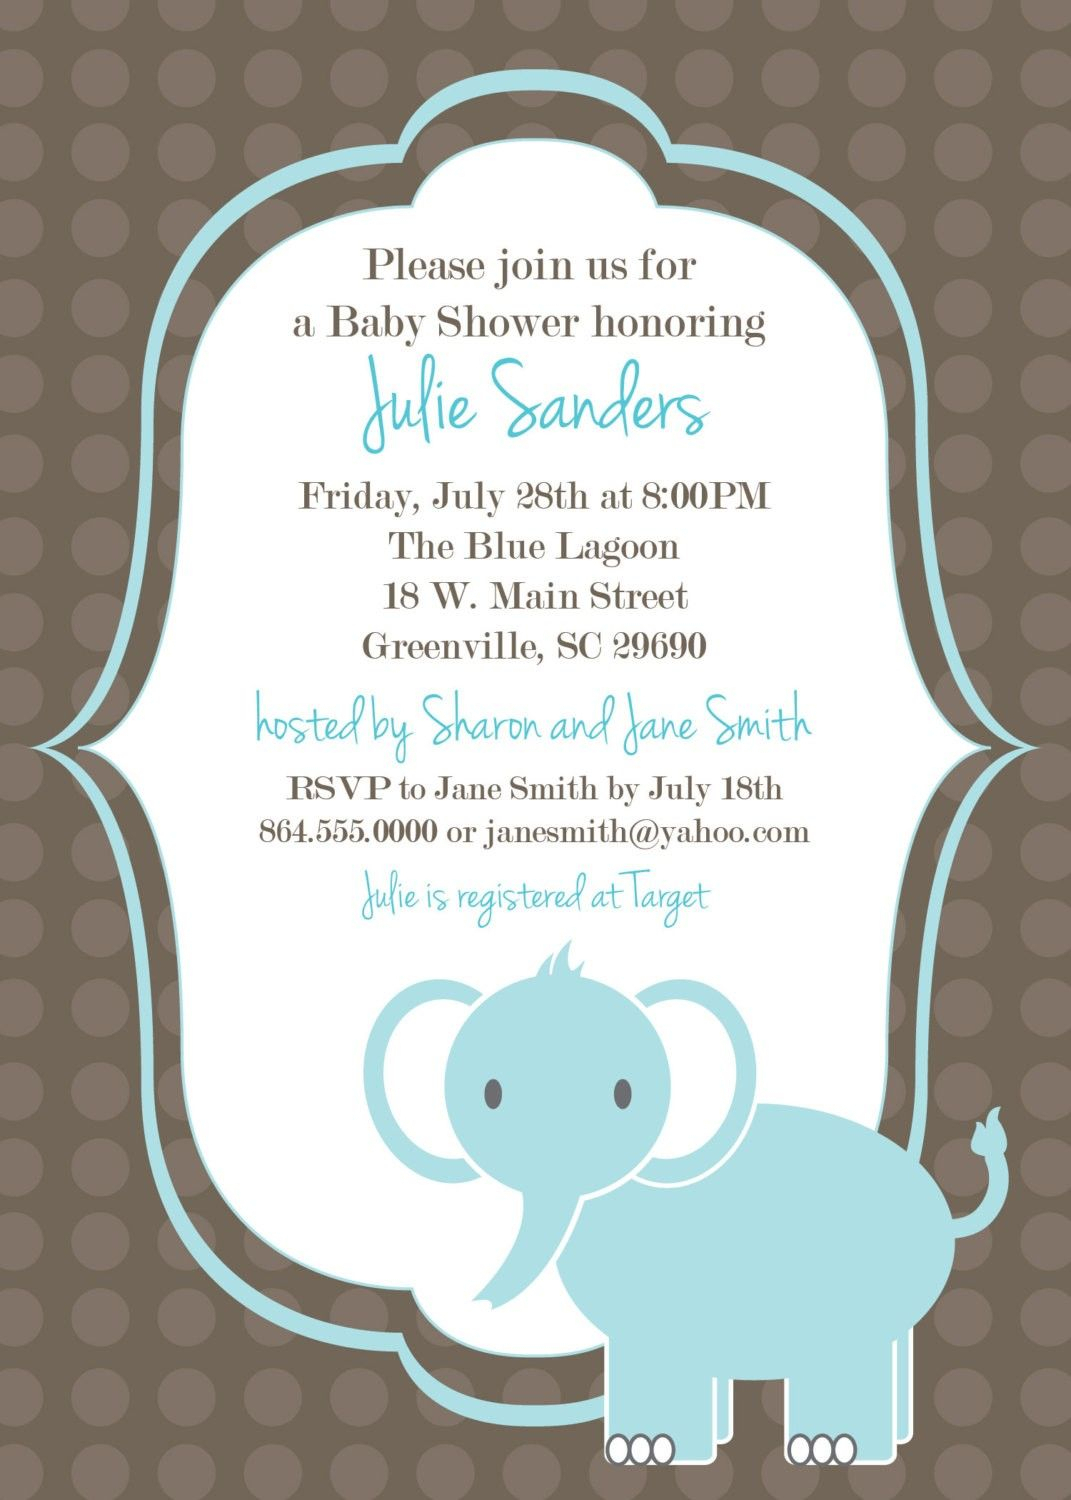 How Do You Make A Baby Shower Invitation On Microsoft Word